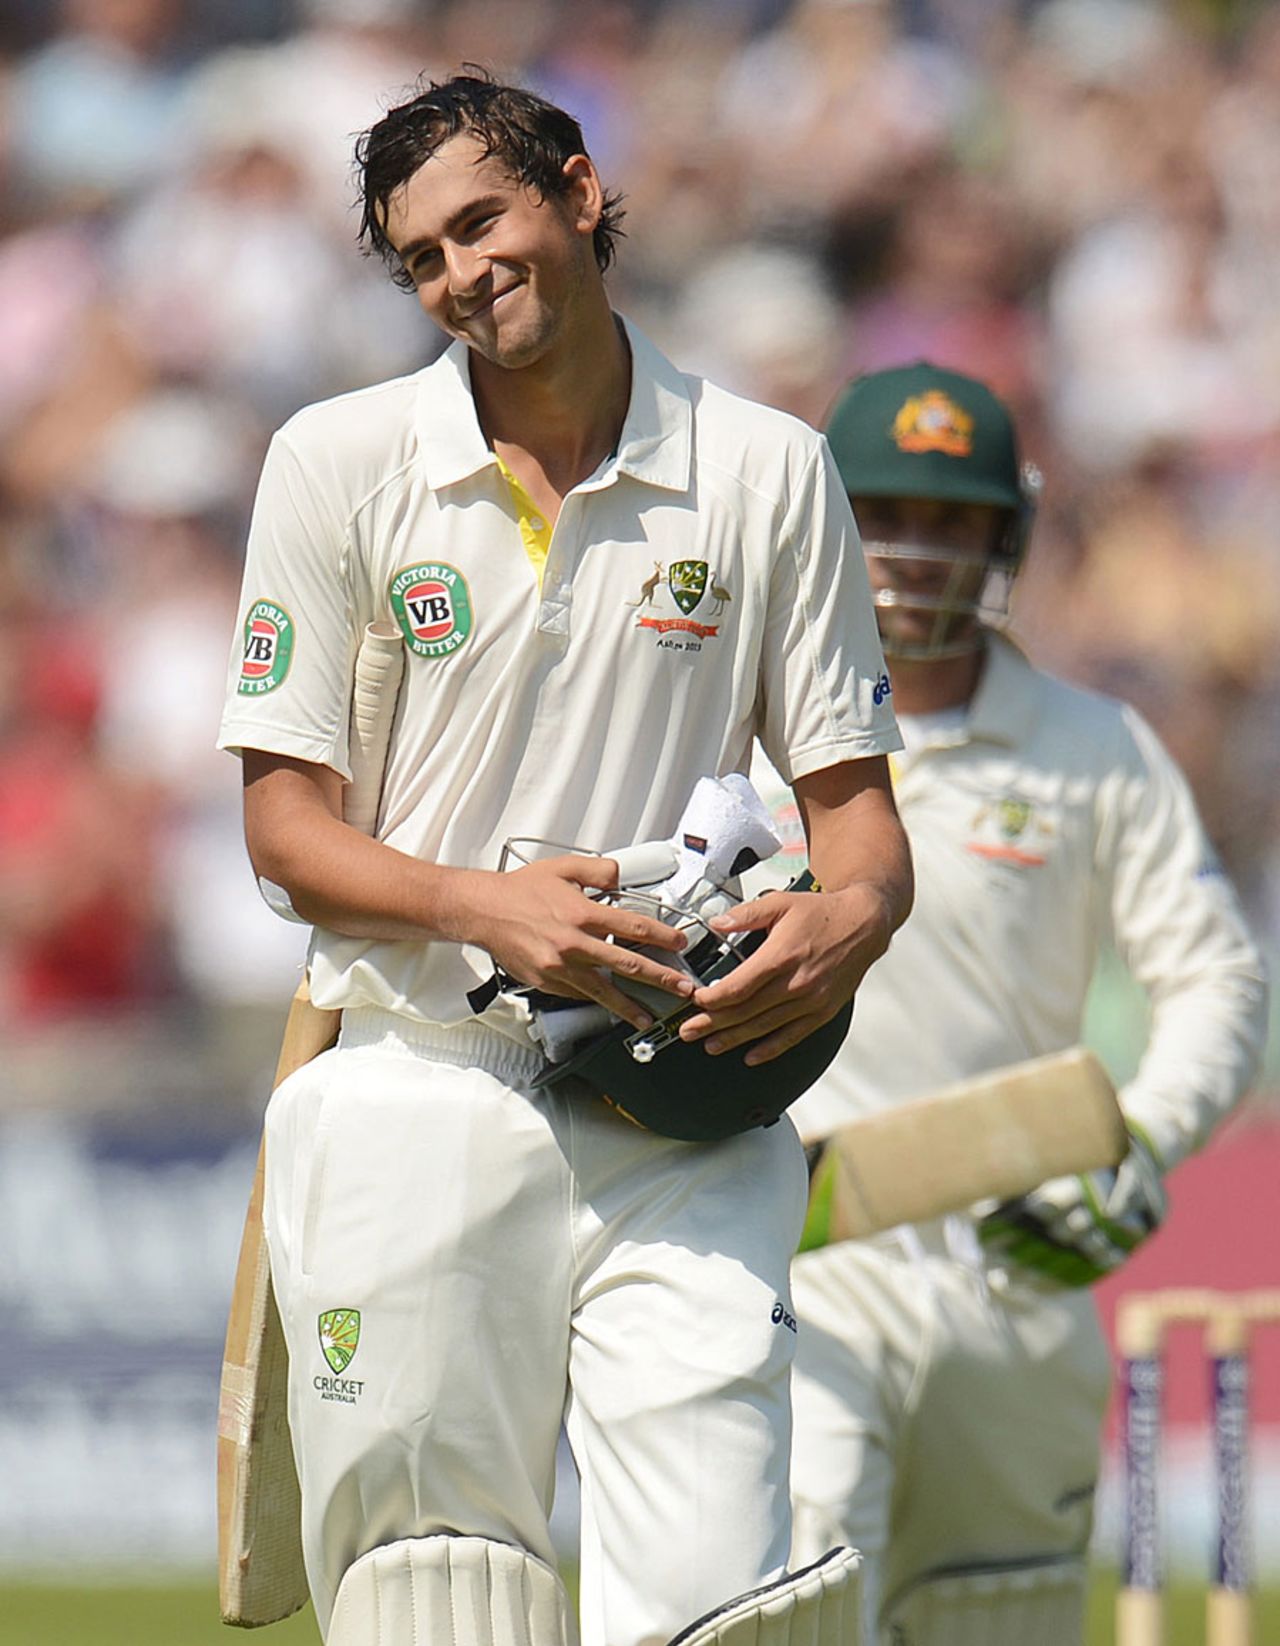 Ashton Agar has a philosophical look after making 98 on debut, England v Australia, 1st Investec Test, Trent Bridge, 2nd day, July 11, 2013